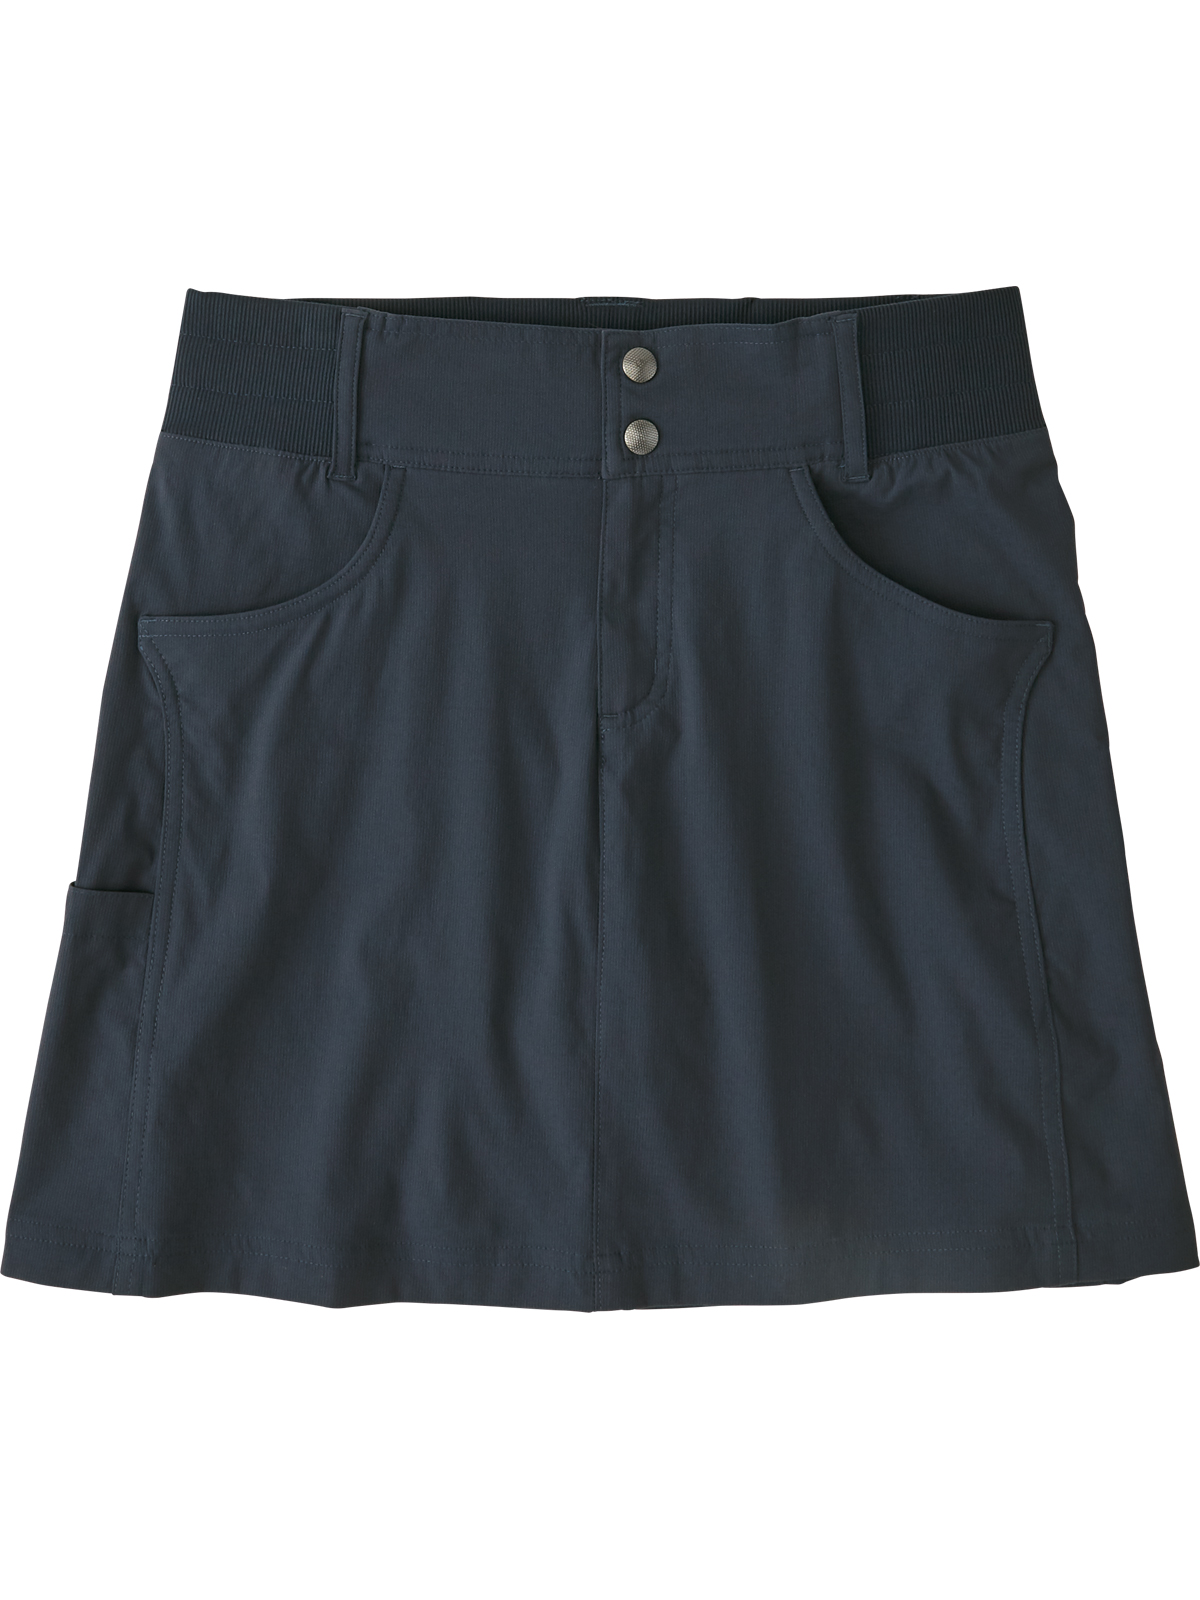 Hiking Skort with Pockets: Clamber Recycled | Title Nine